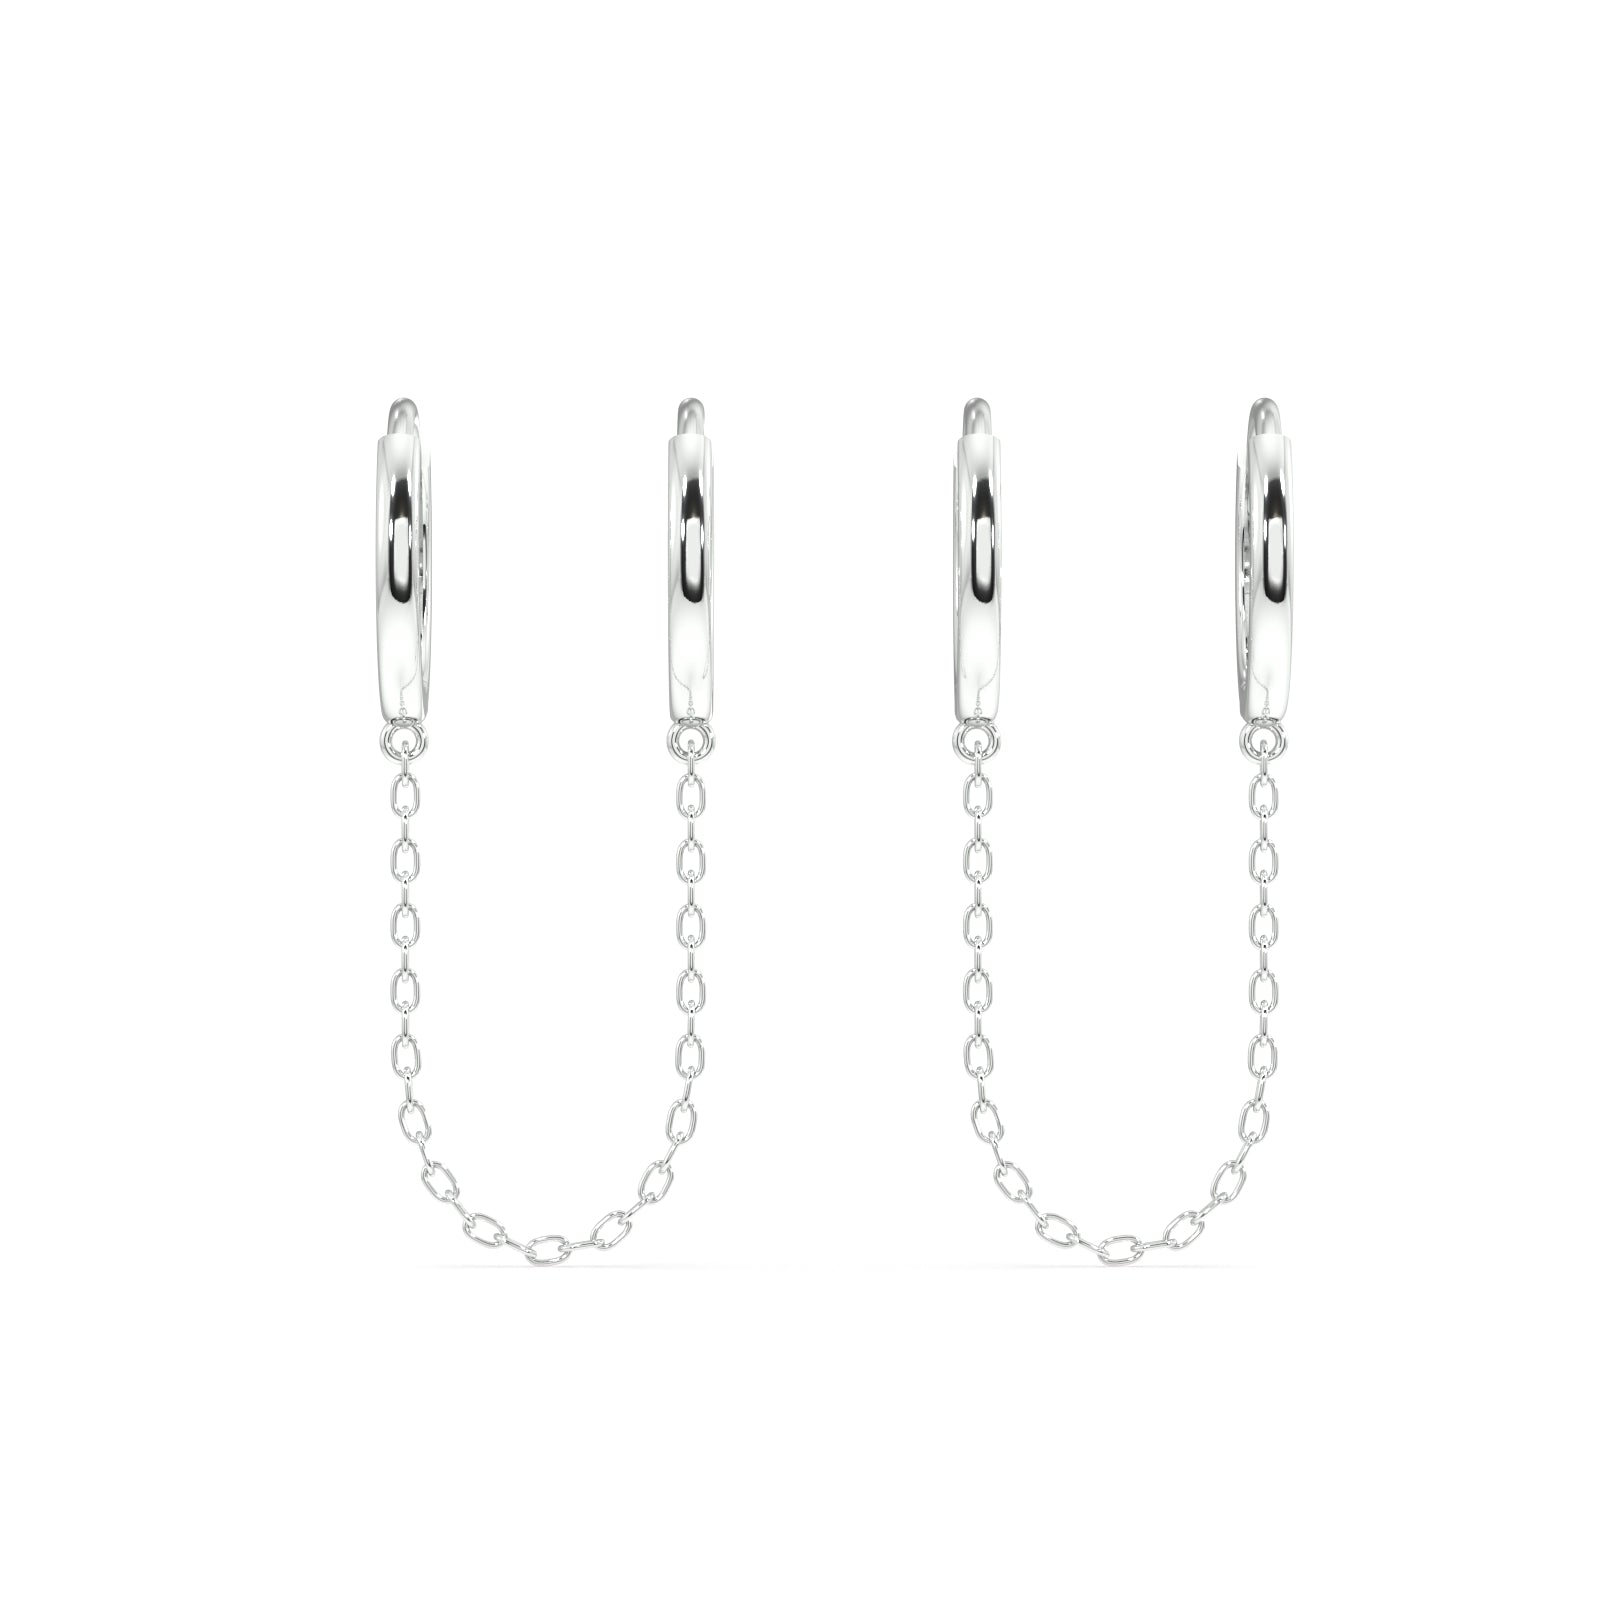 Chain connector essential hoops